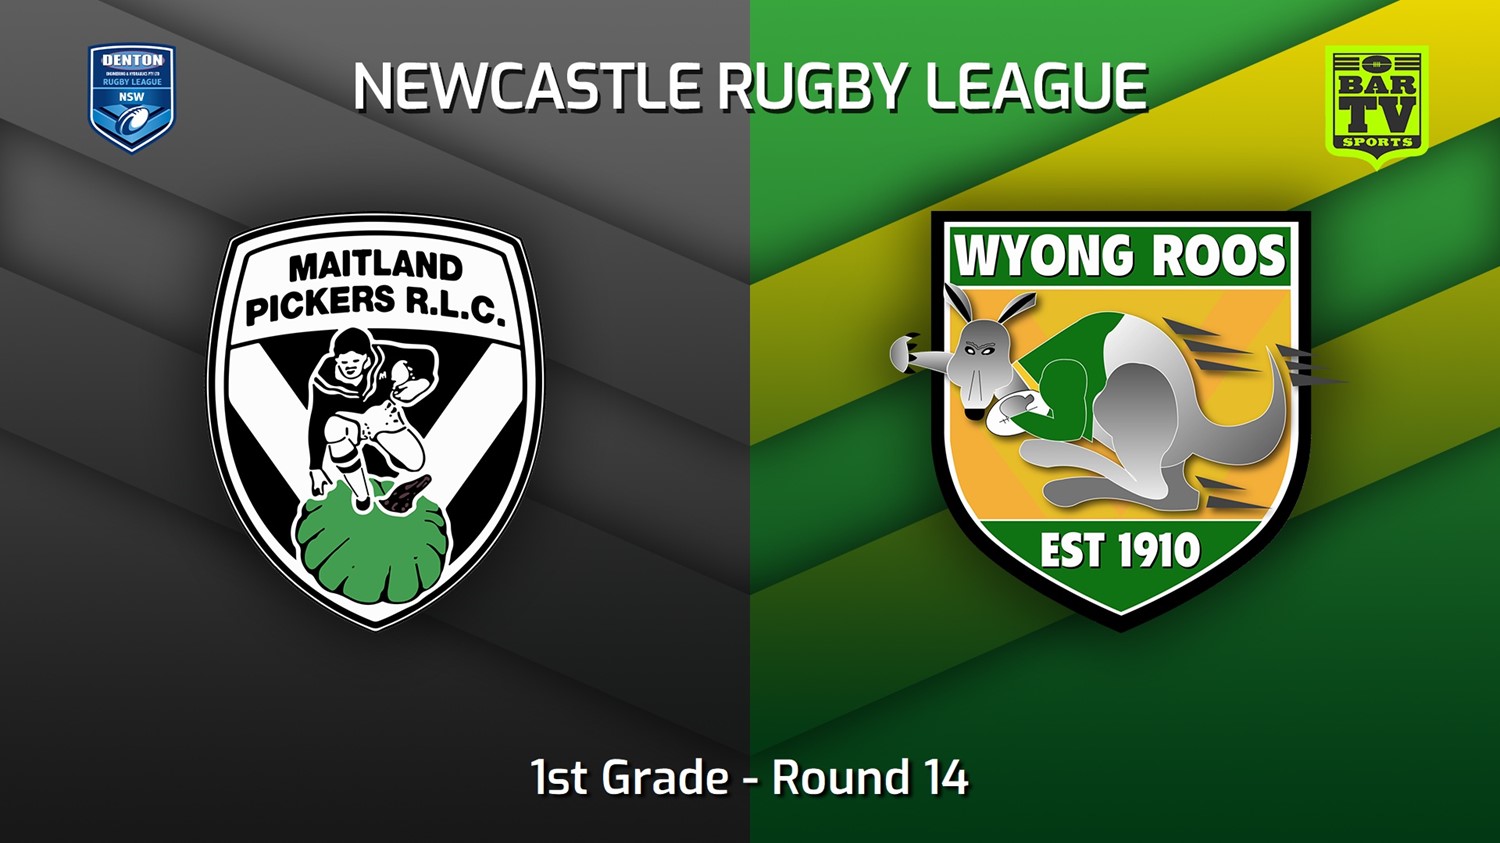 220702-Newcastle Round 14 - 1st Grade - Maitland Pickers v Wyong Roos Slate Image